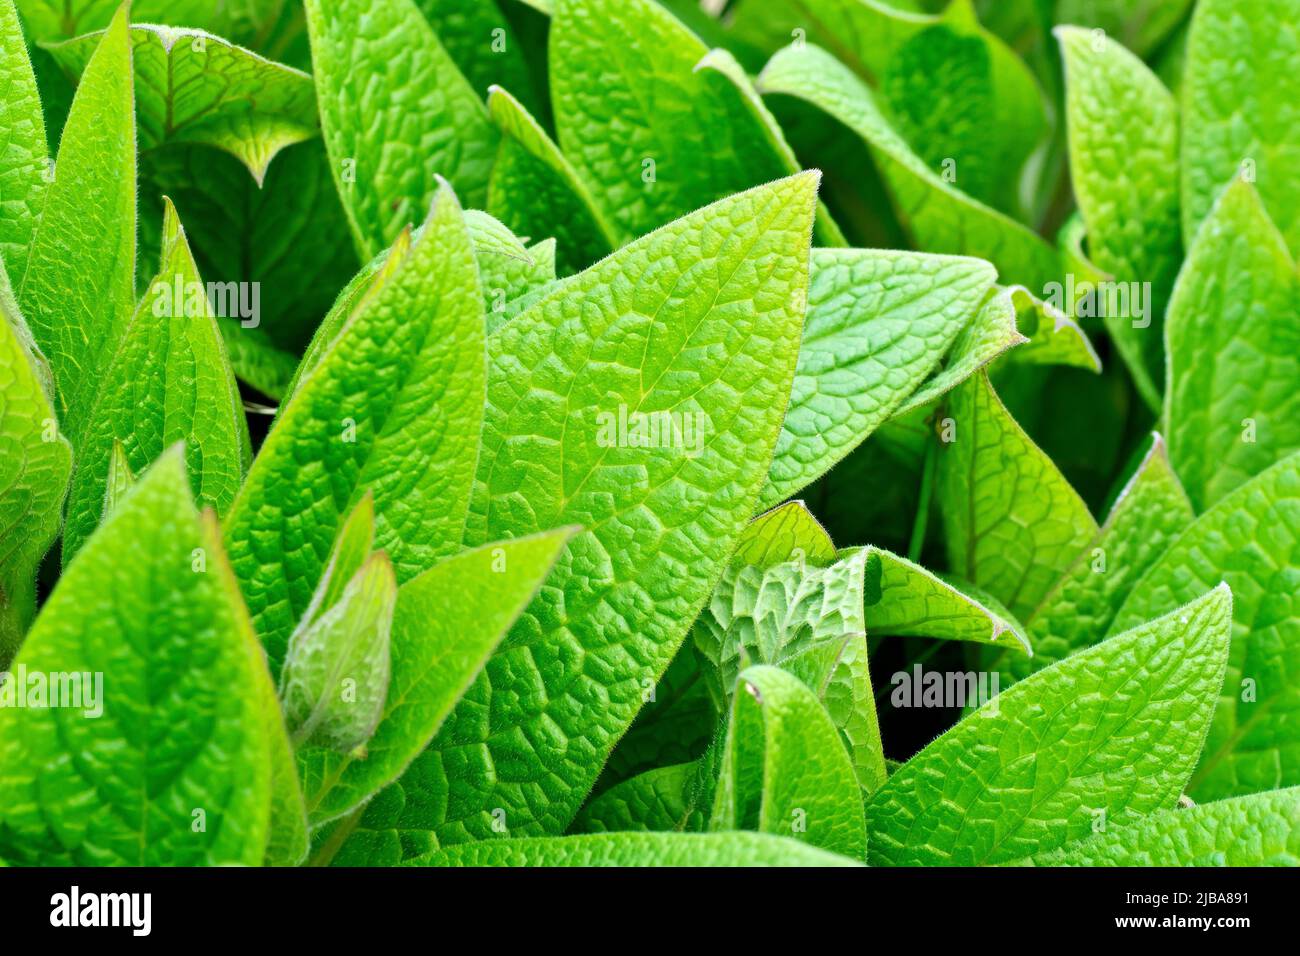 Comfrey, most likely Tuberous Comfrey (symphytum tuberosum), close up of a patch of fresh green leaves as they begin to appear in the spring. Stock Photo